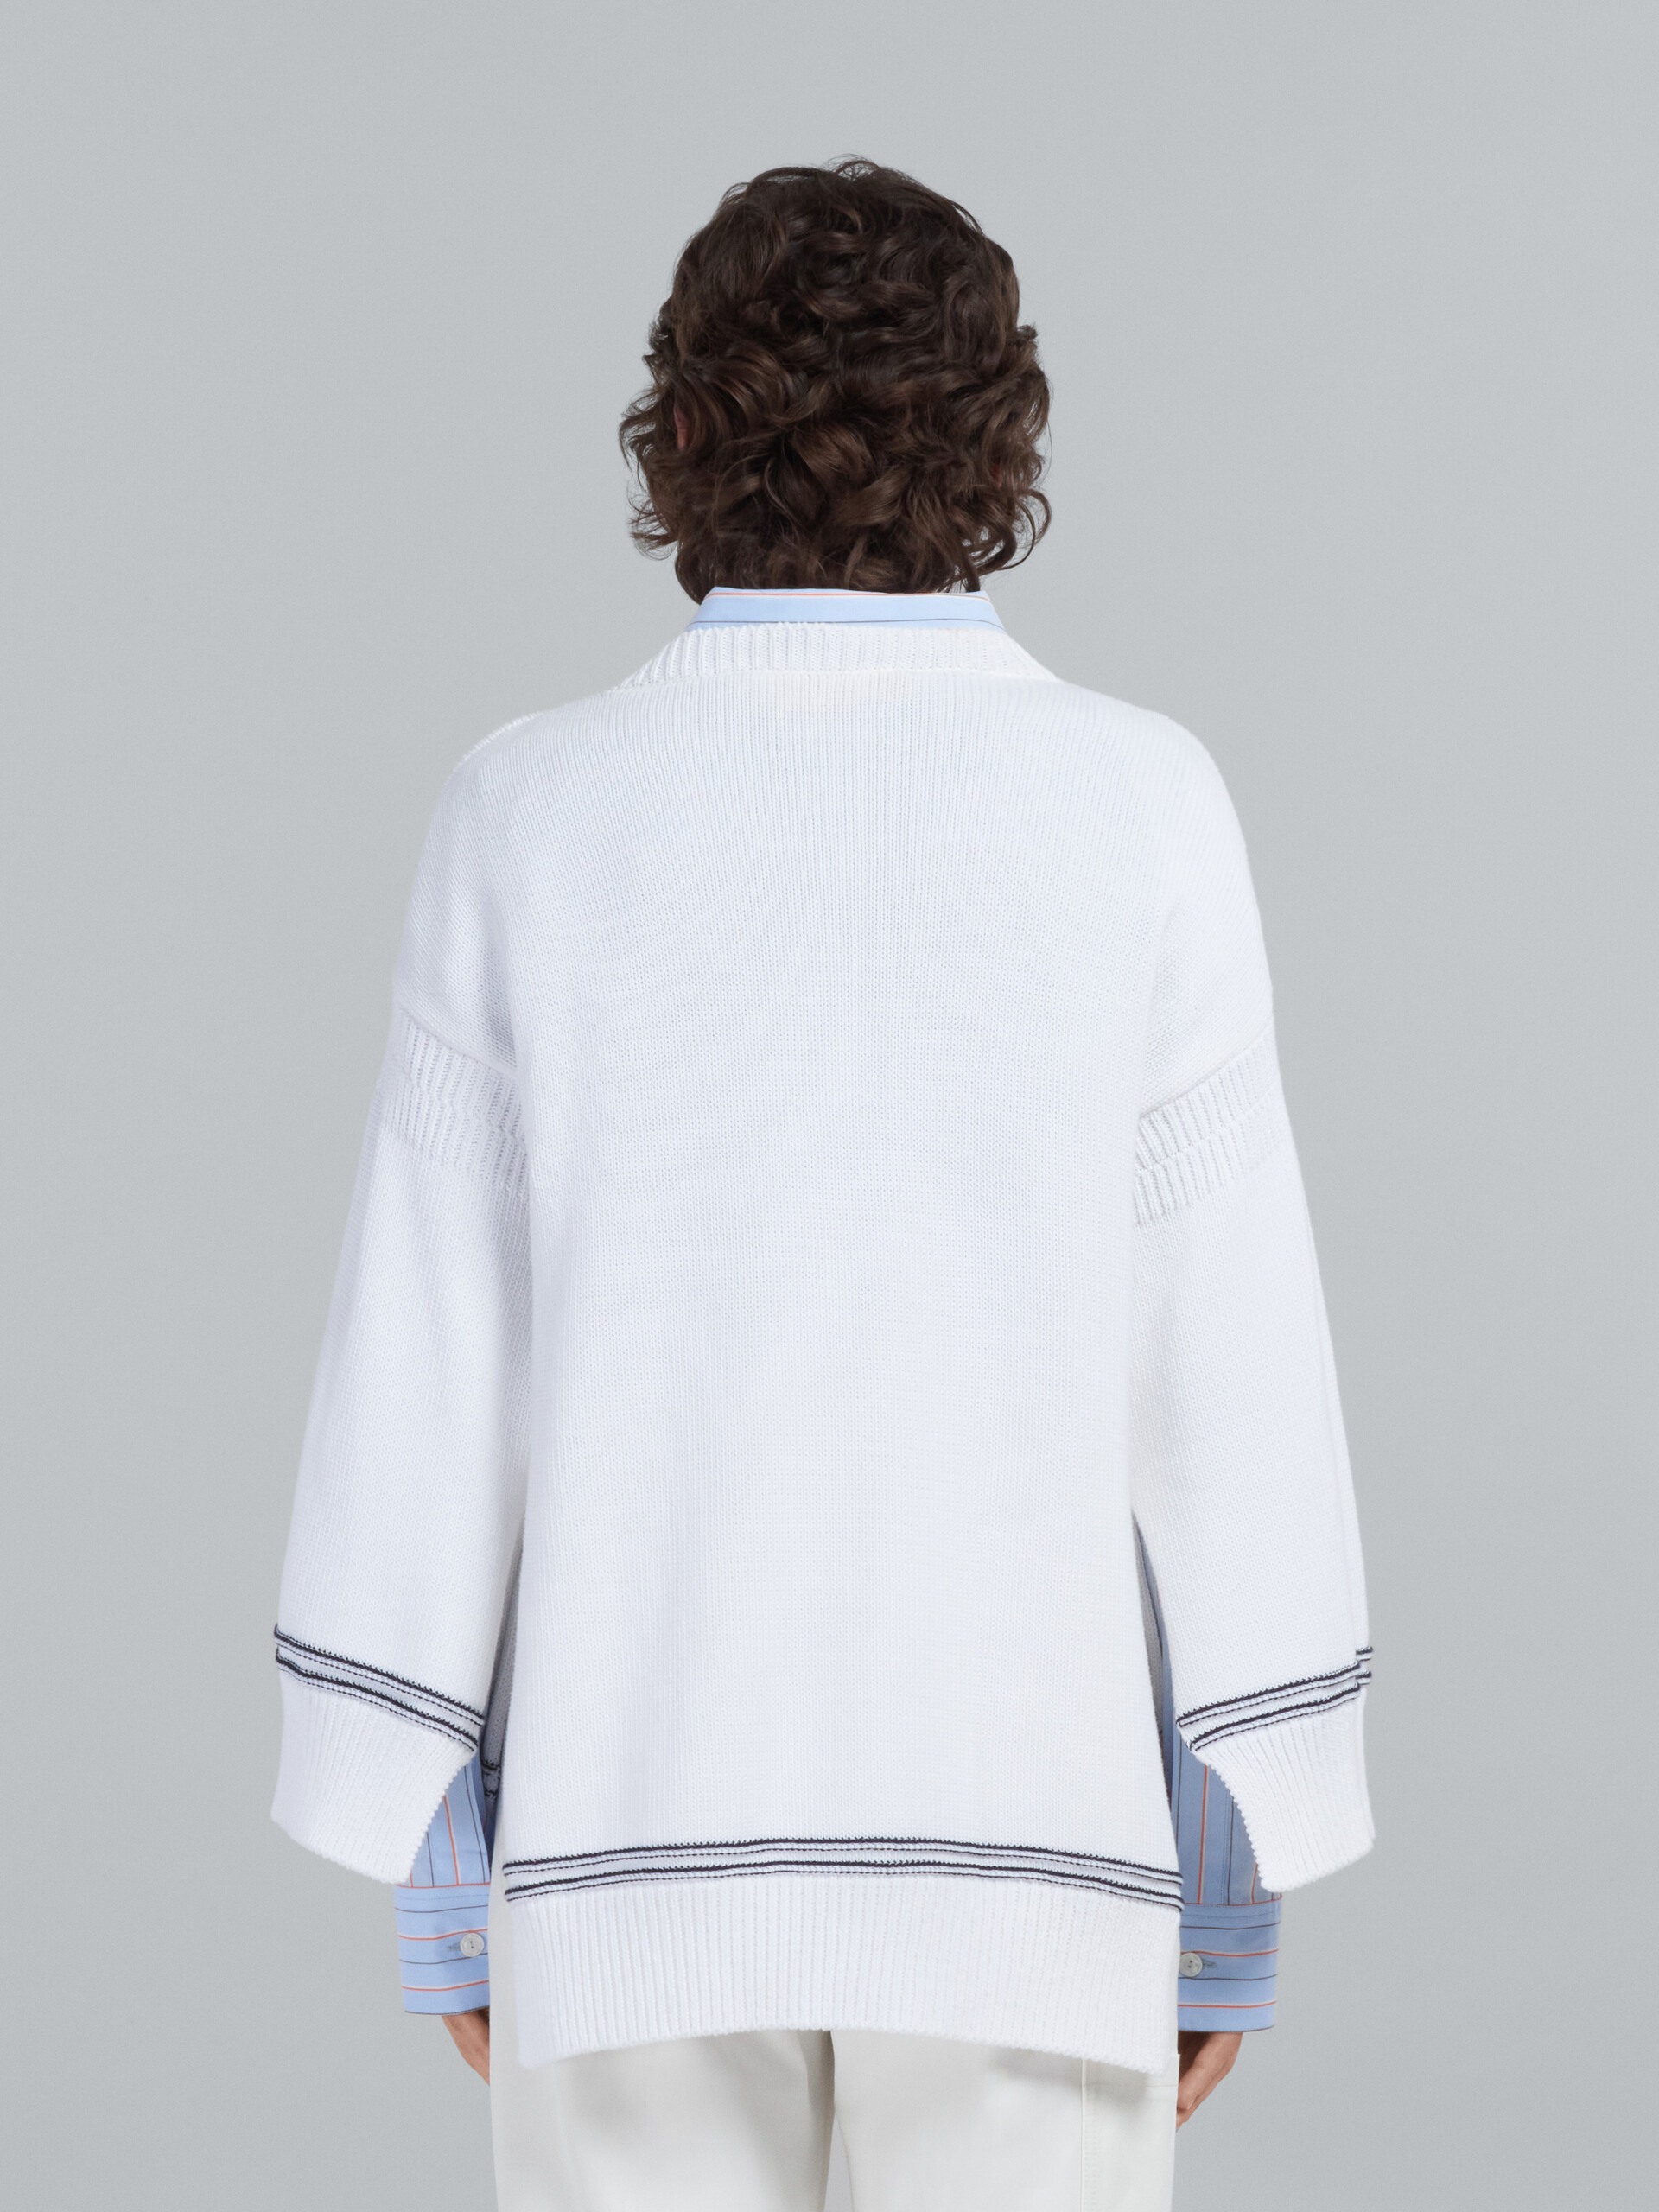 White cotton sweater with logo - Pullovers - Image 3